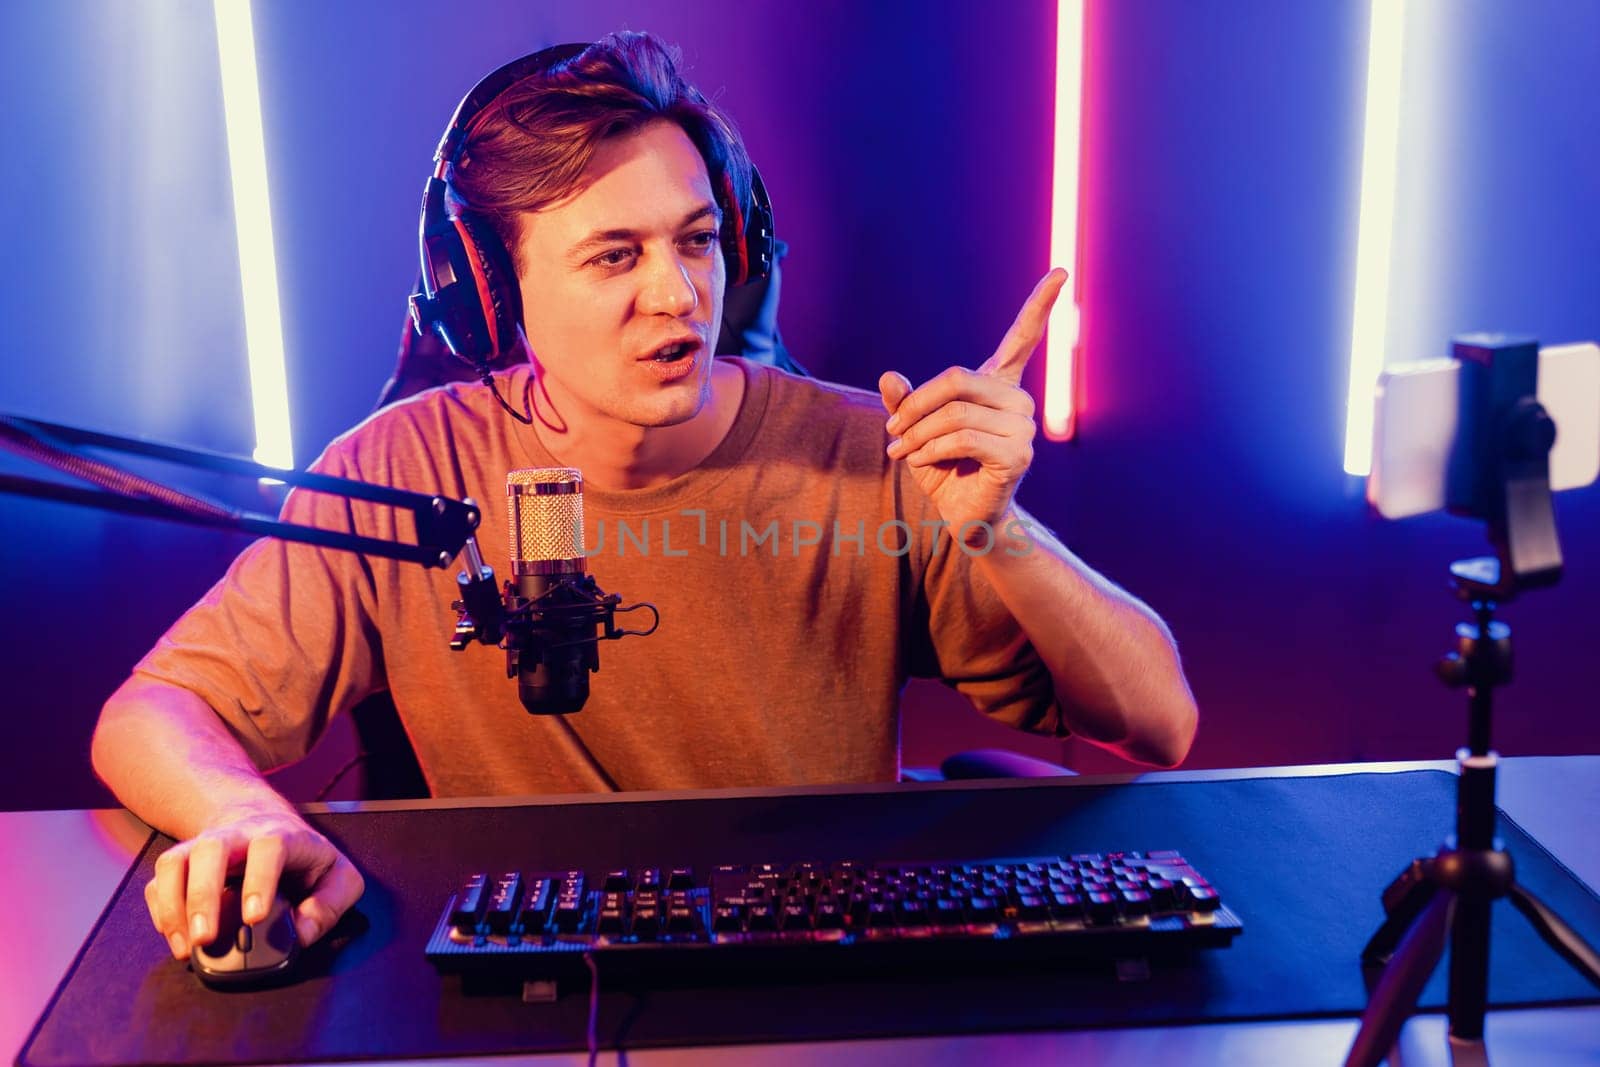 Host channel of gaming smart streamer playing online game to be winner, wearing headphone with viewers live steaming on media social online for selected team competition at neon light room. Pecuniary.